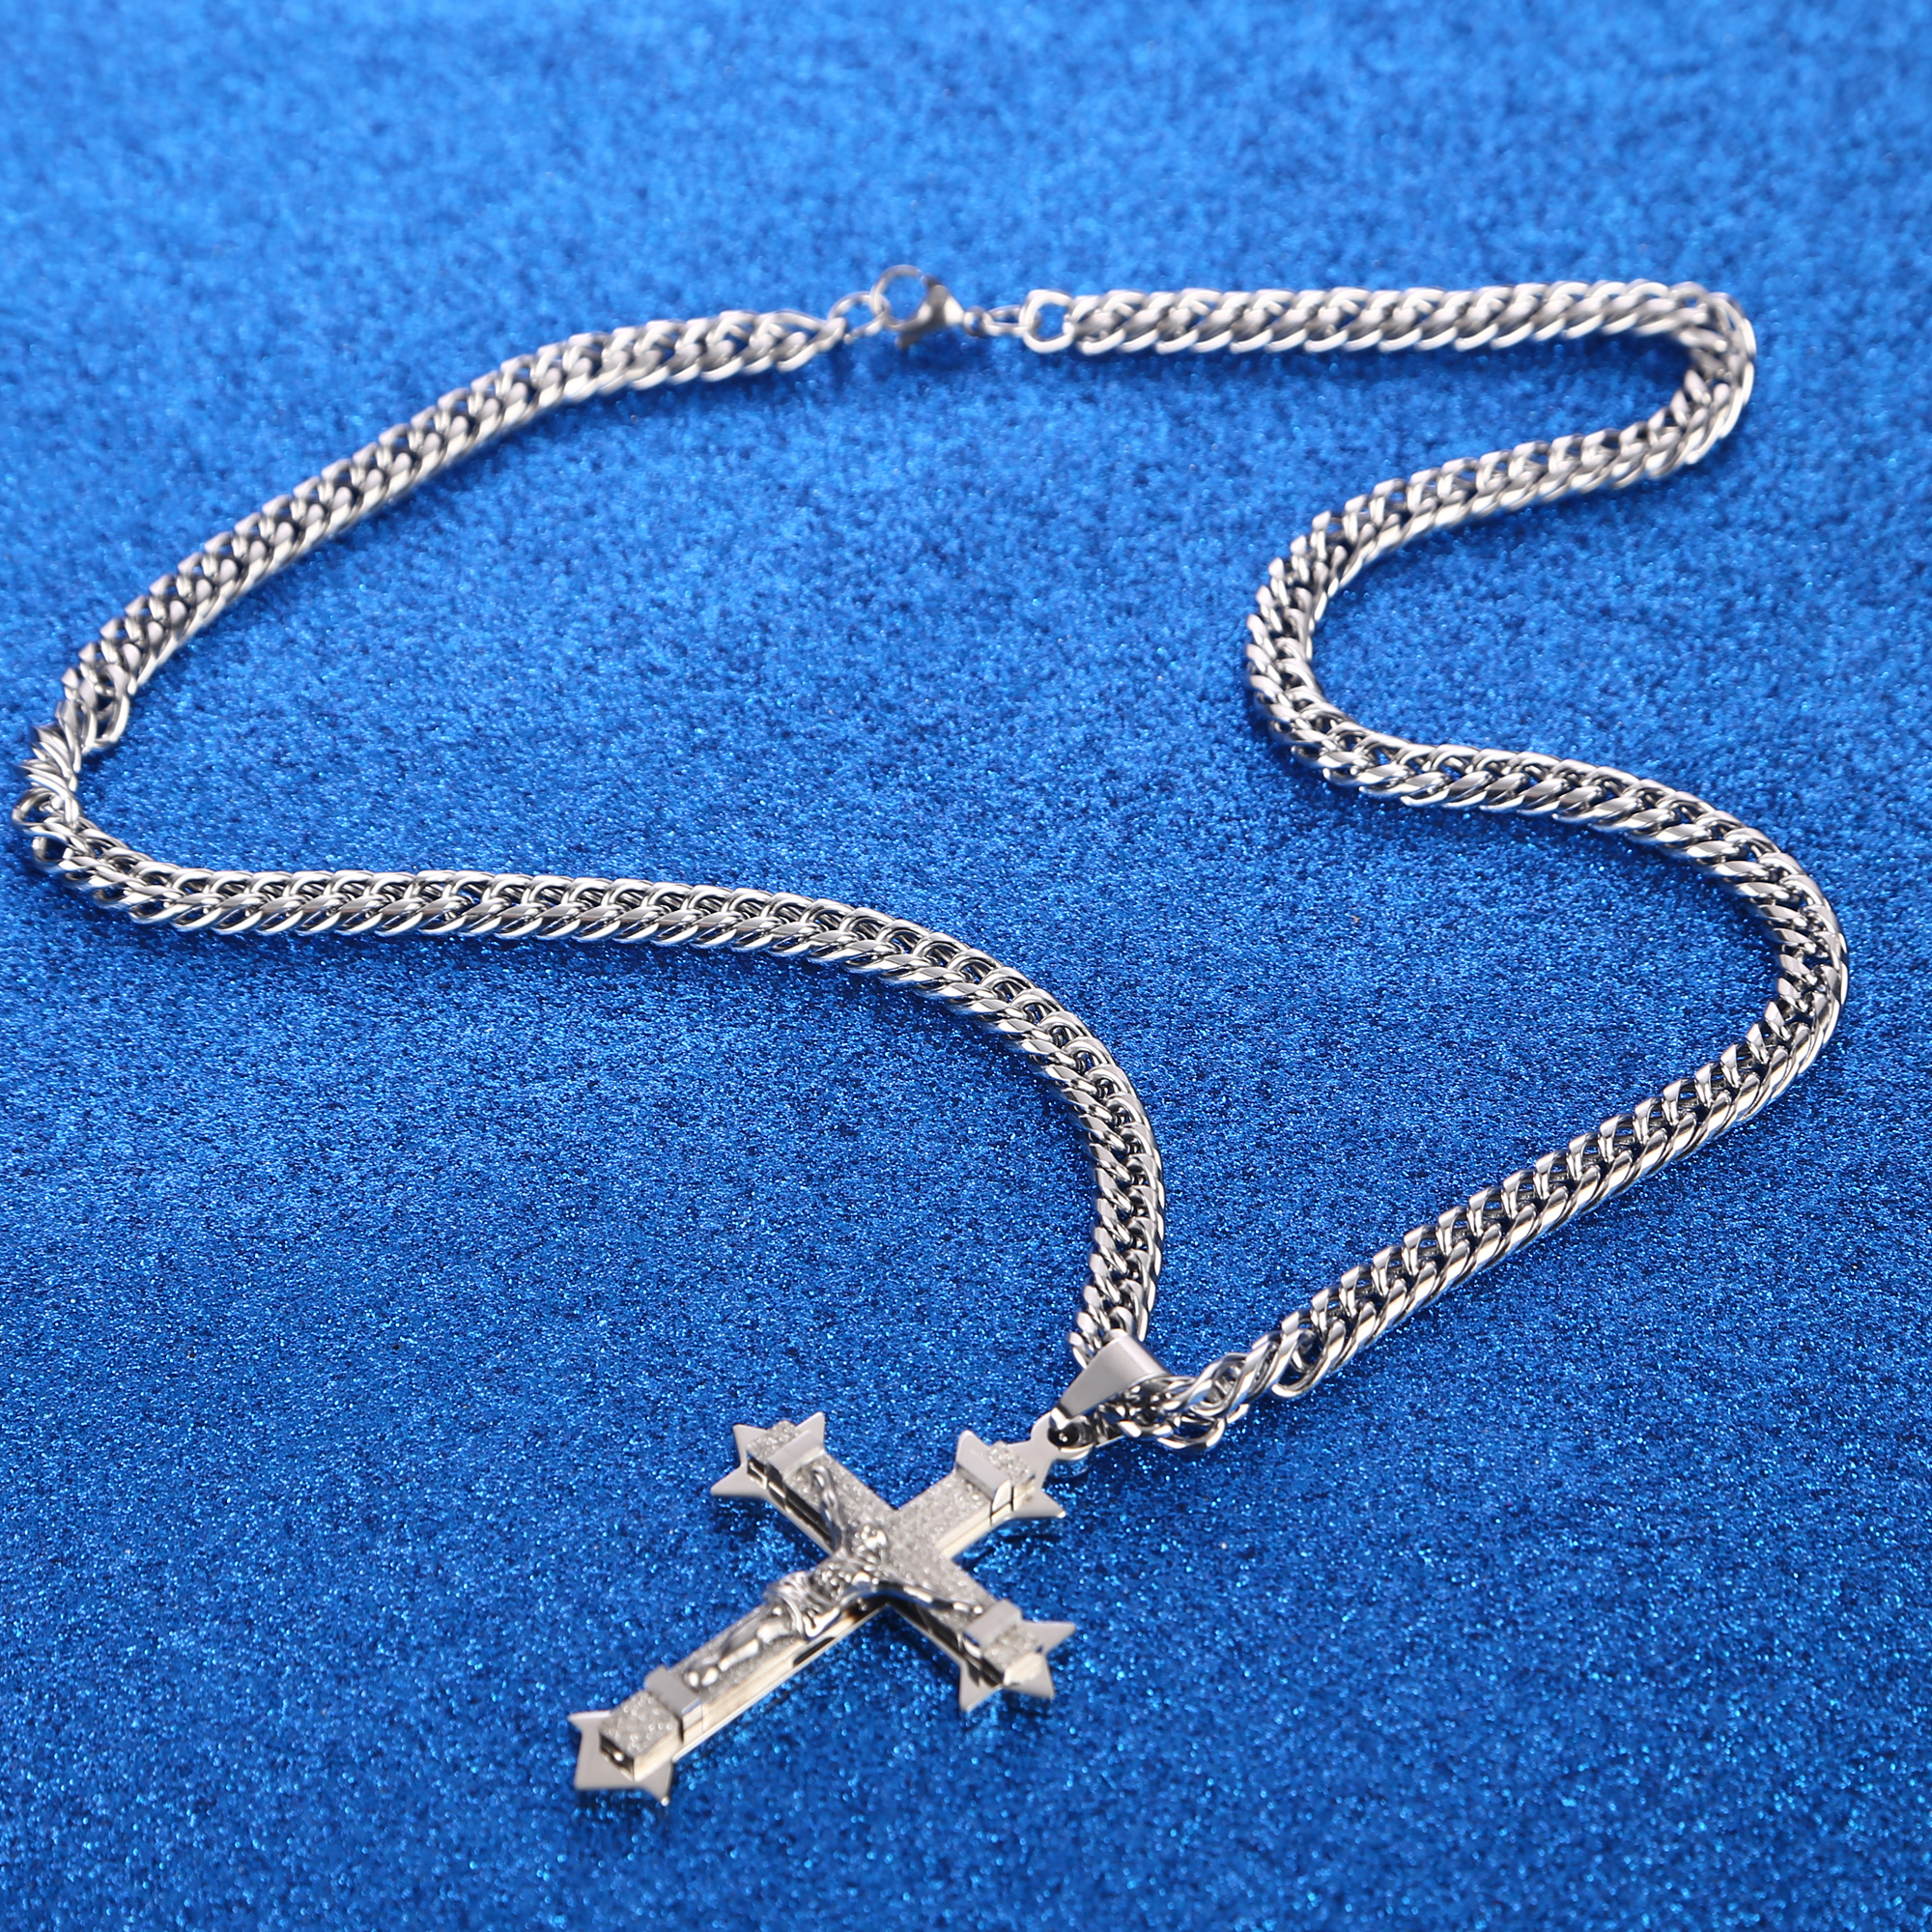 Gold&silver Crucifix Jesus Cross Necklace Stainless Steel Christs Pendant link Chain Men Necklaces Jewelry Gifts 23" 62(60cm)